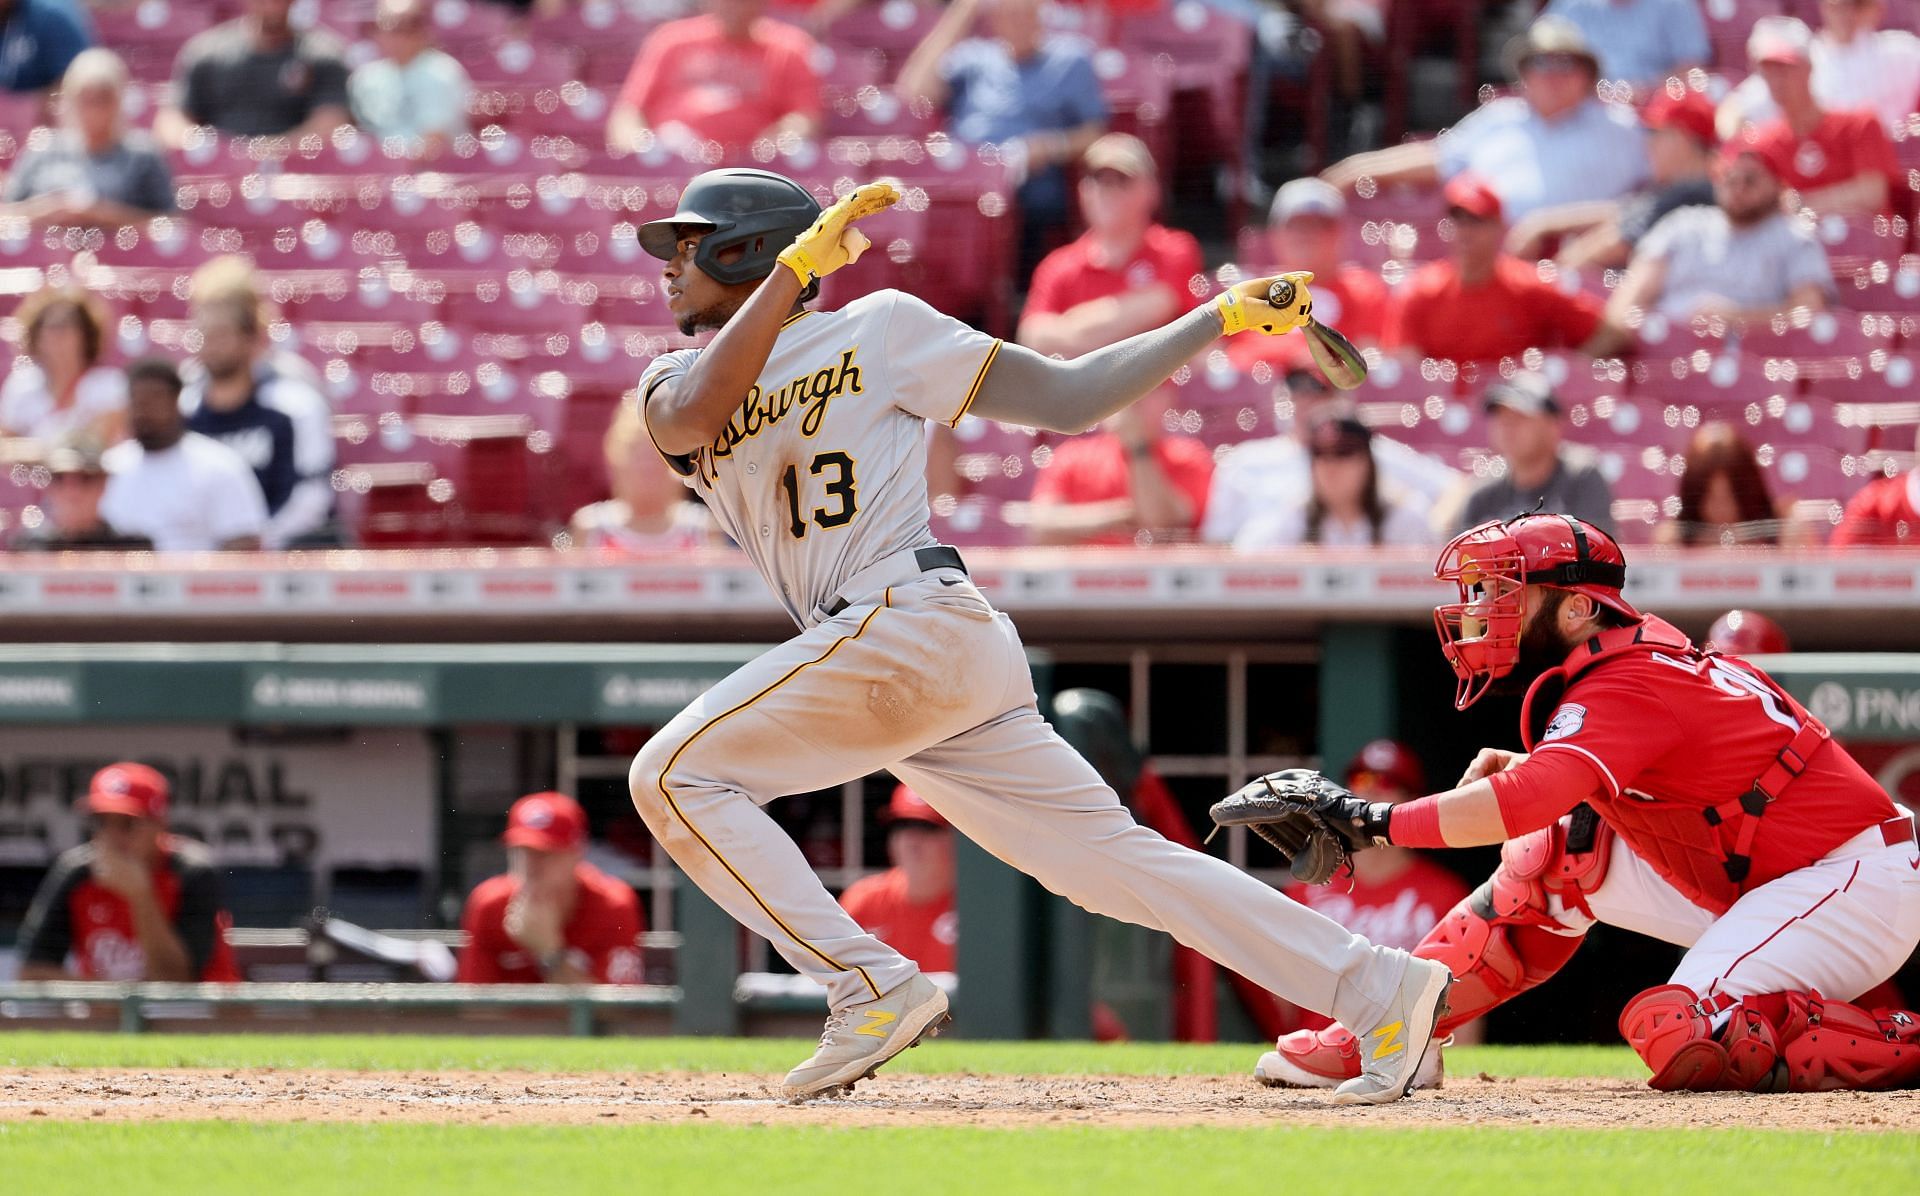 Reds vs. Pirates prediction, betting odds for MLB on Saturday 